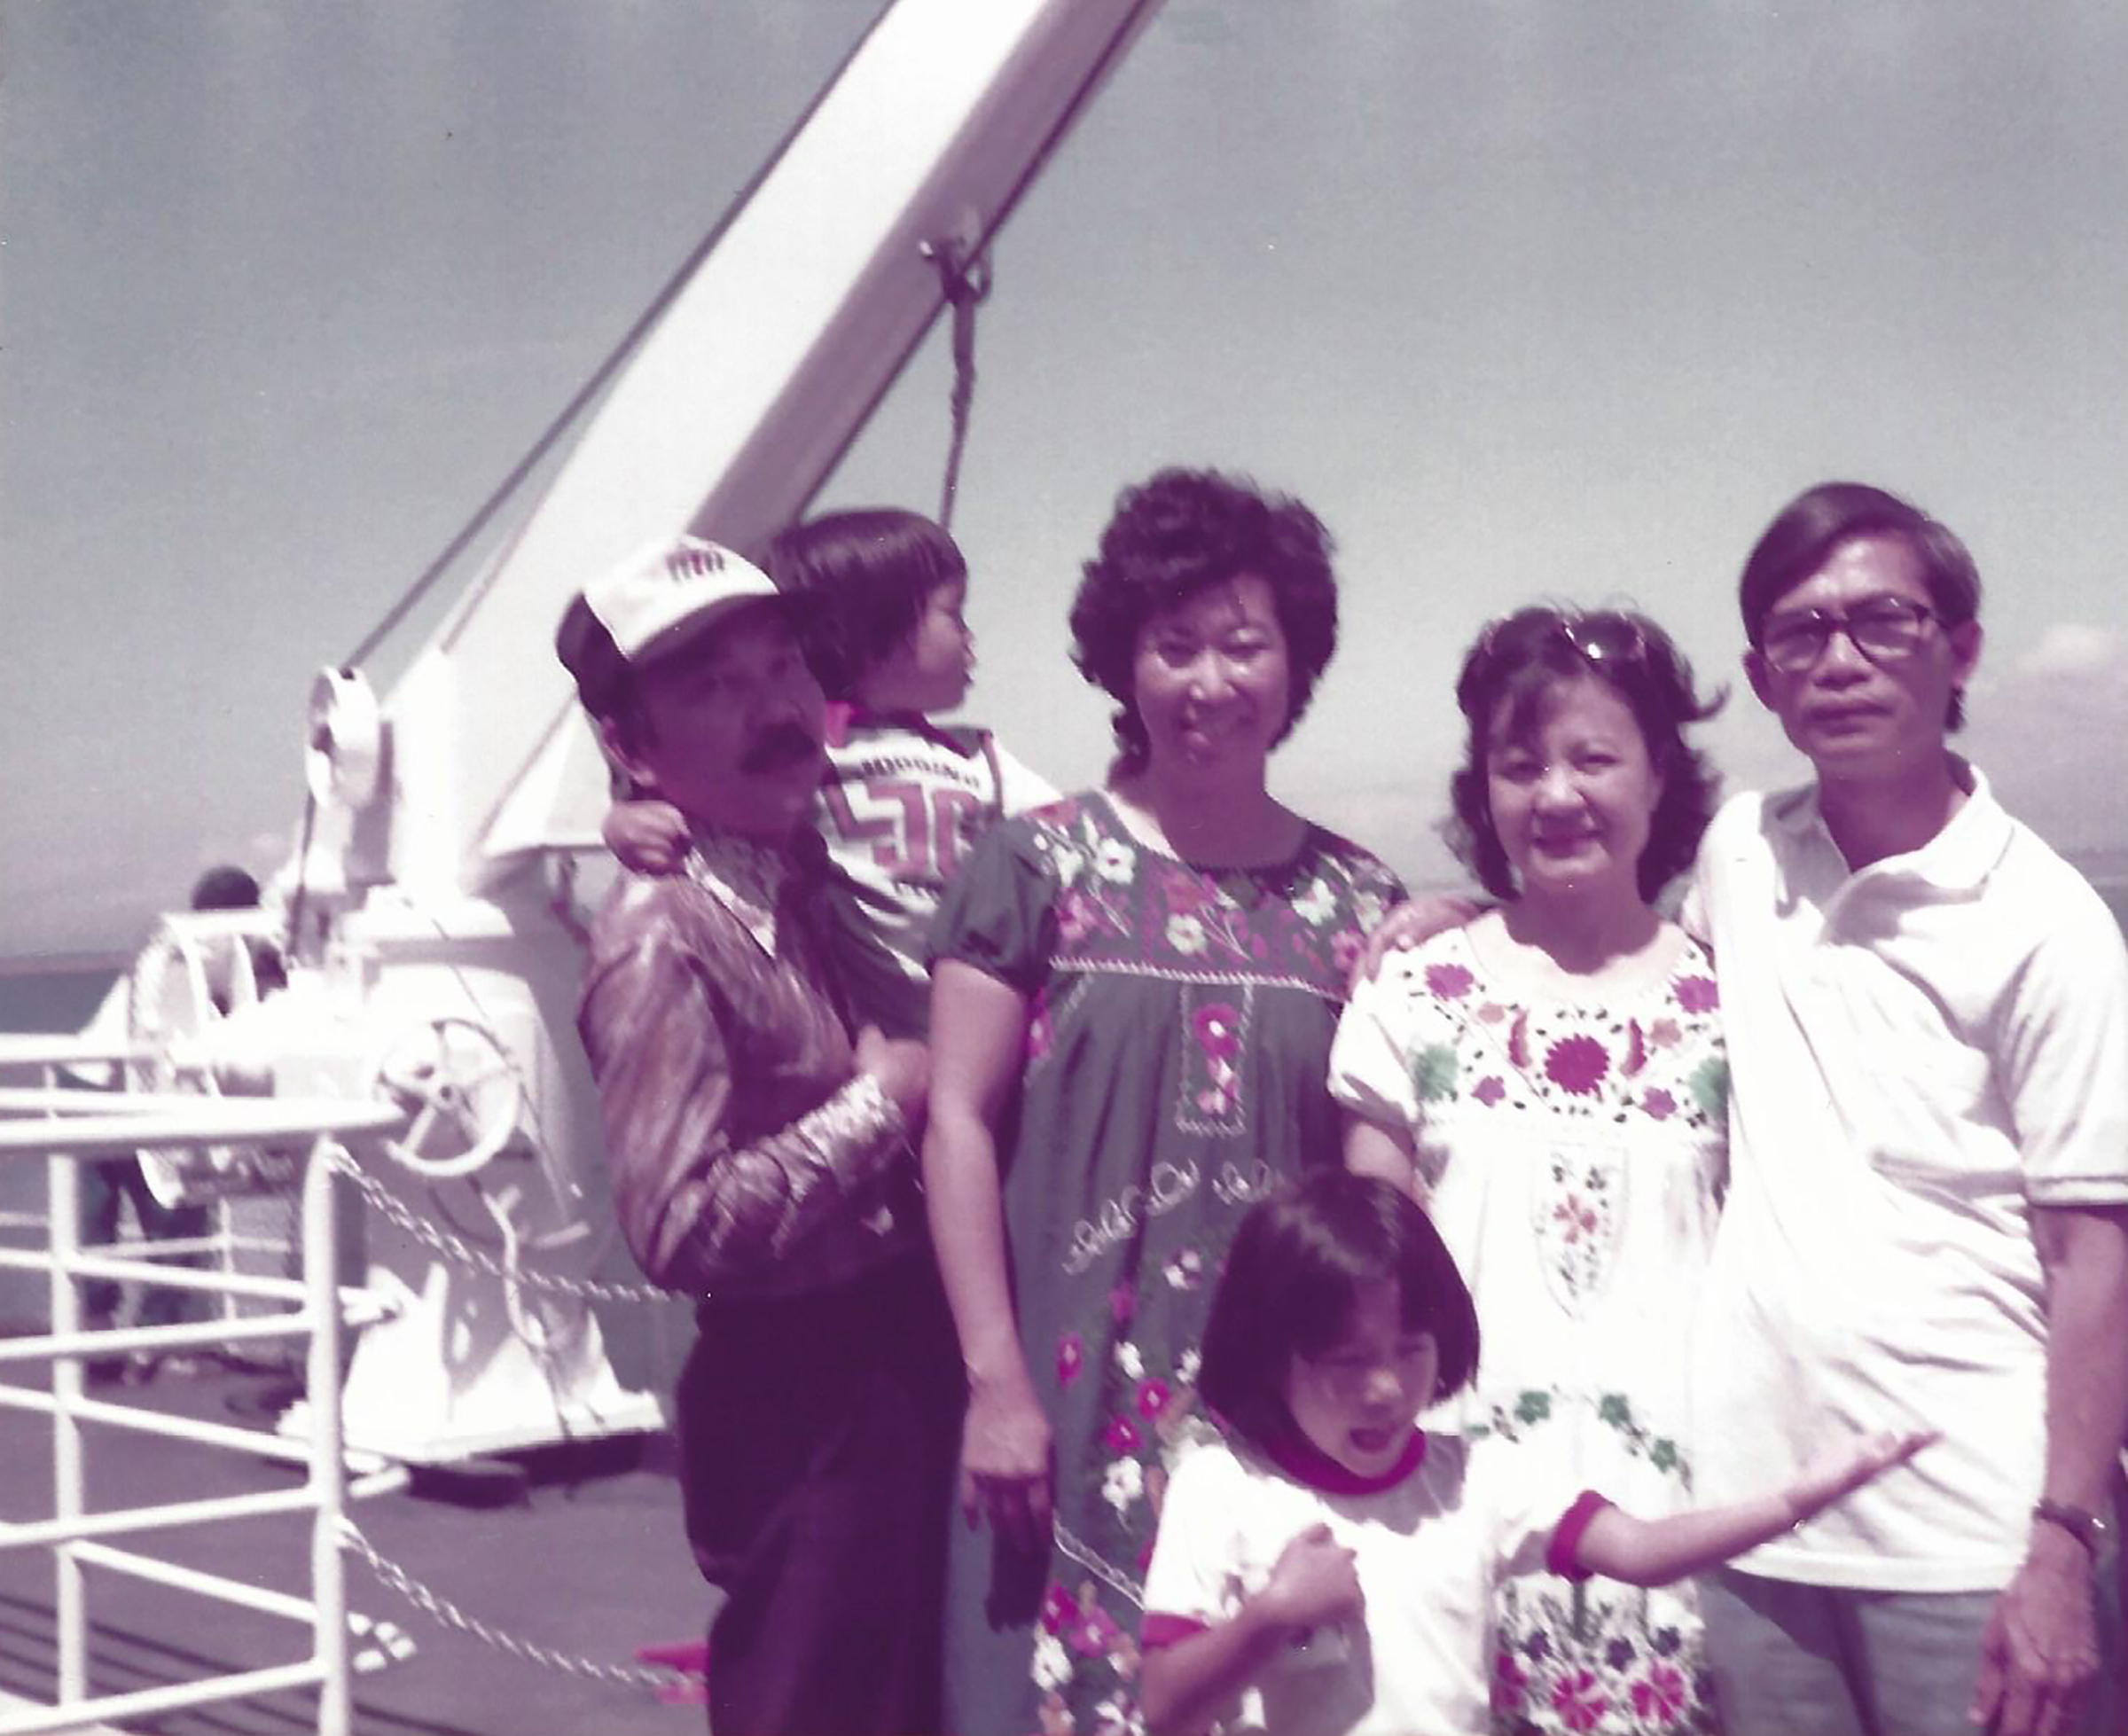 Aimee Phan, center, with, from left, her father, brother, mother, aunt and uncle in Vancouver, Canada, summer 1983. (Courtesy Aimee Phan)